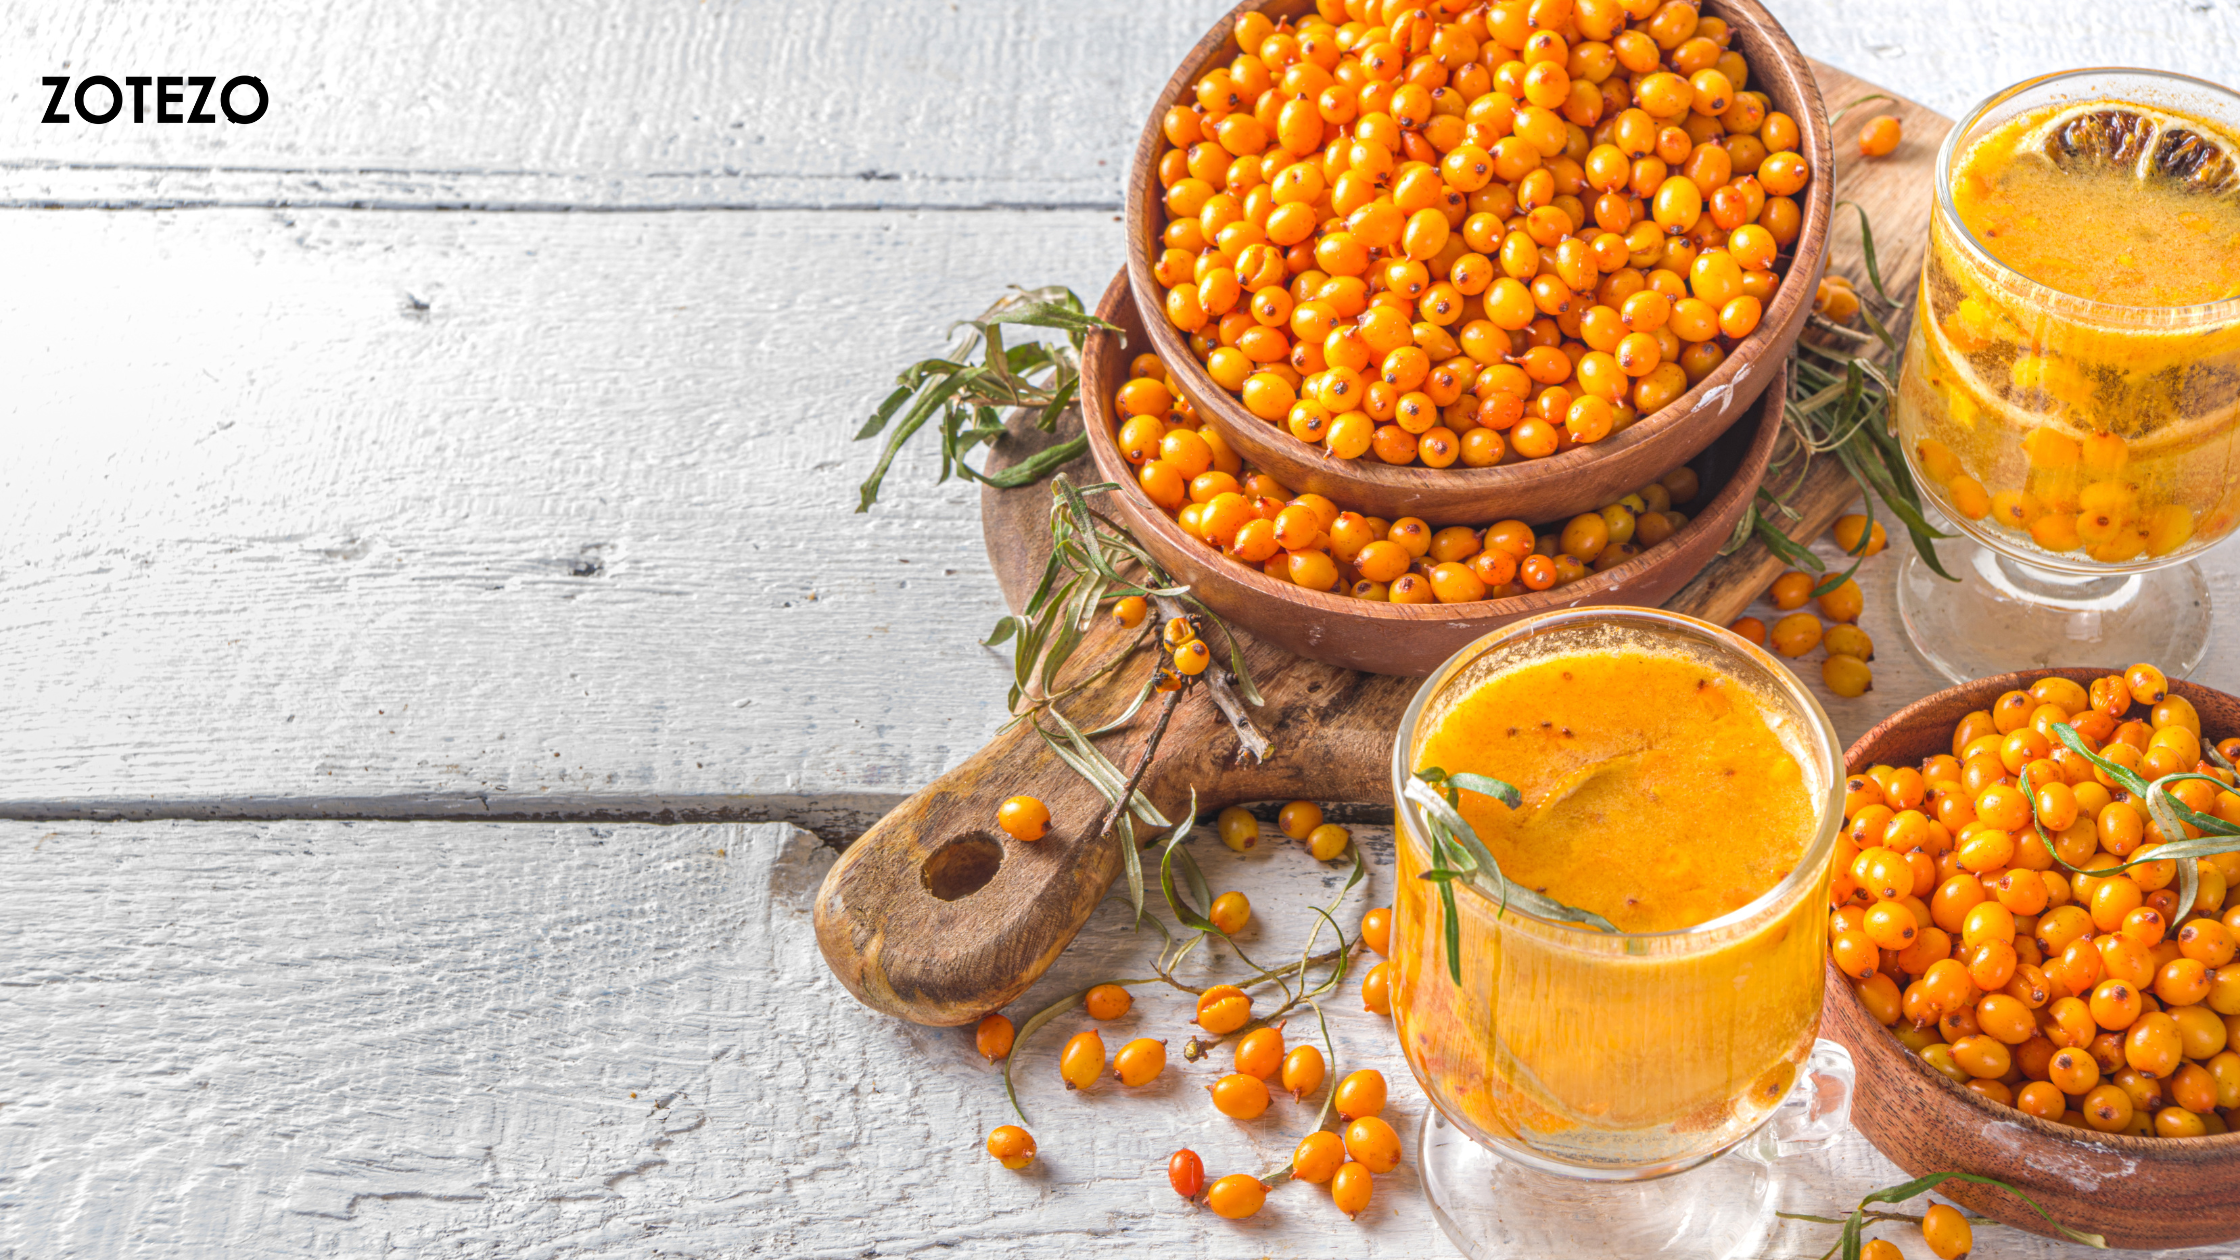 Sea Buckthorn Supplements in the World